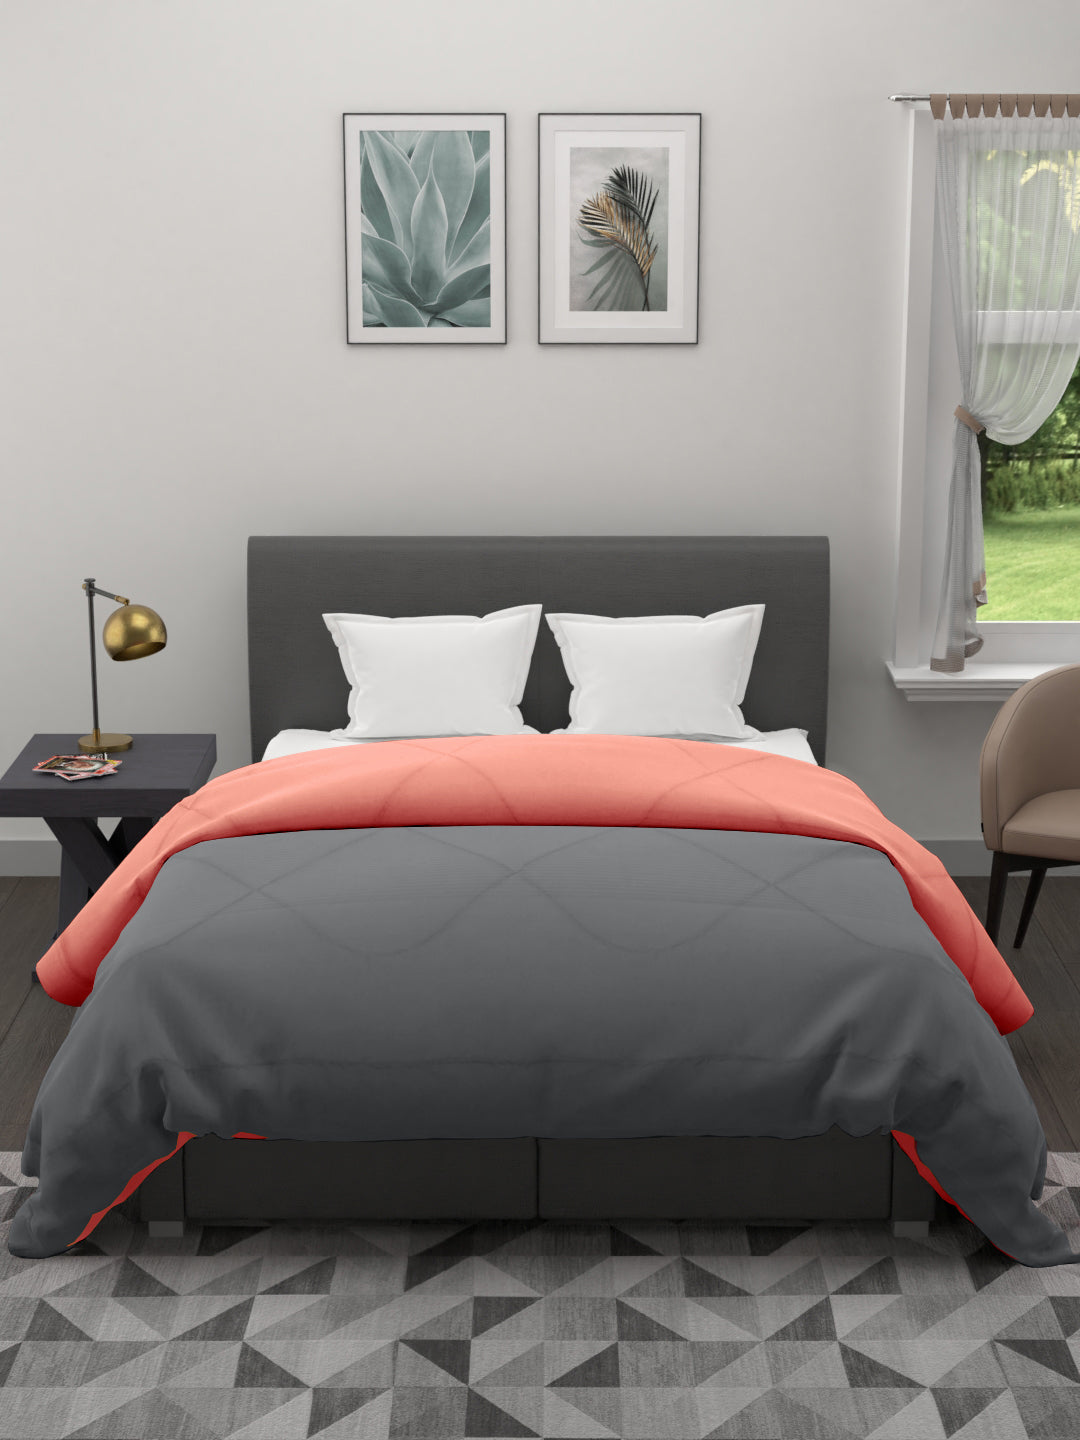 250GSM Reversible Double Bed King Size Comforter; 90x100 Inches; Candy Peach & Grey